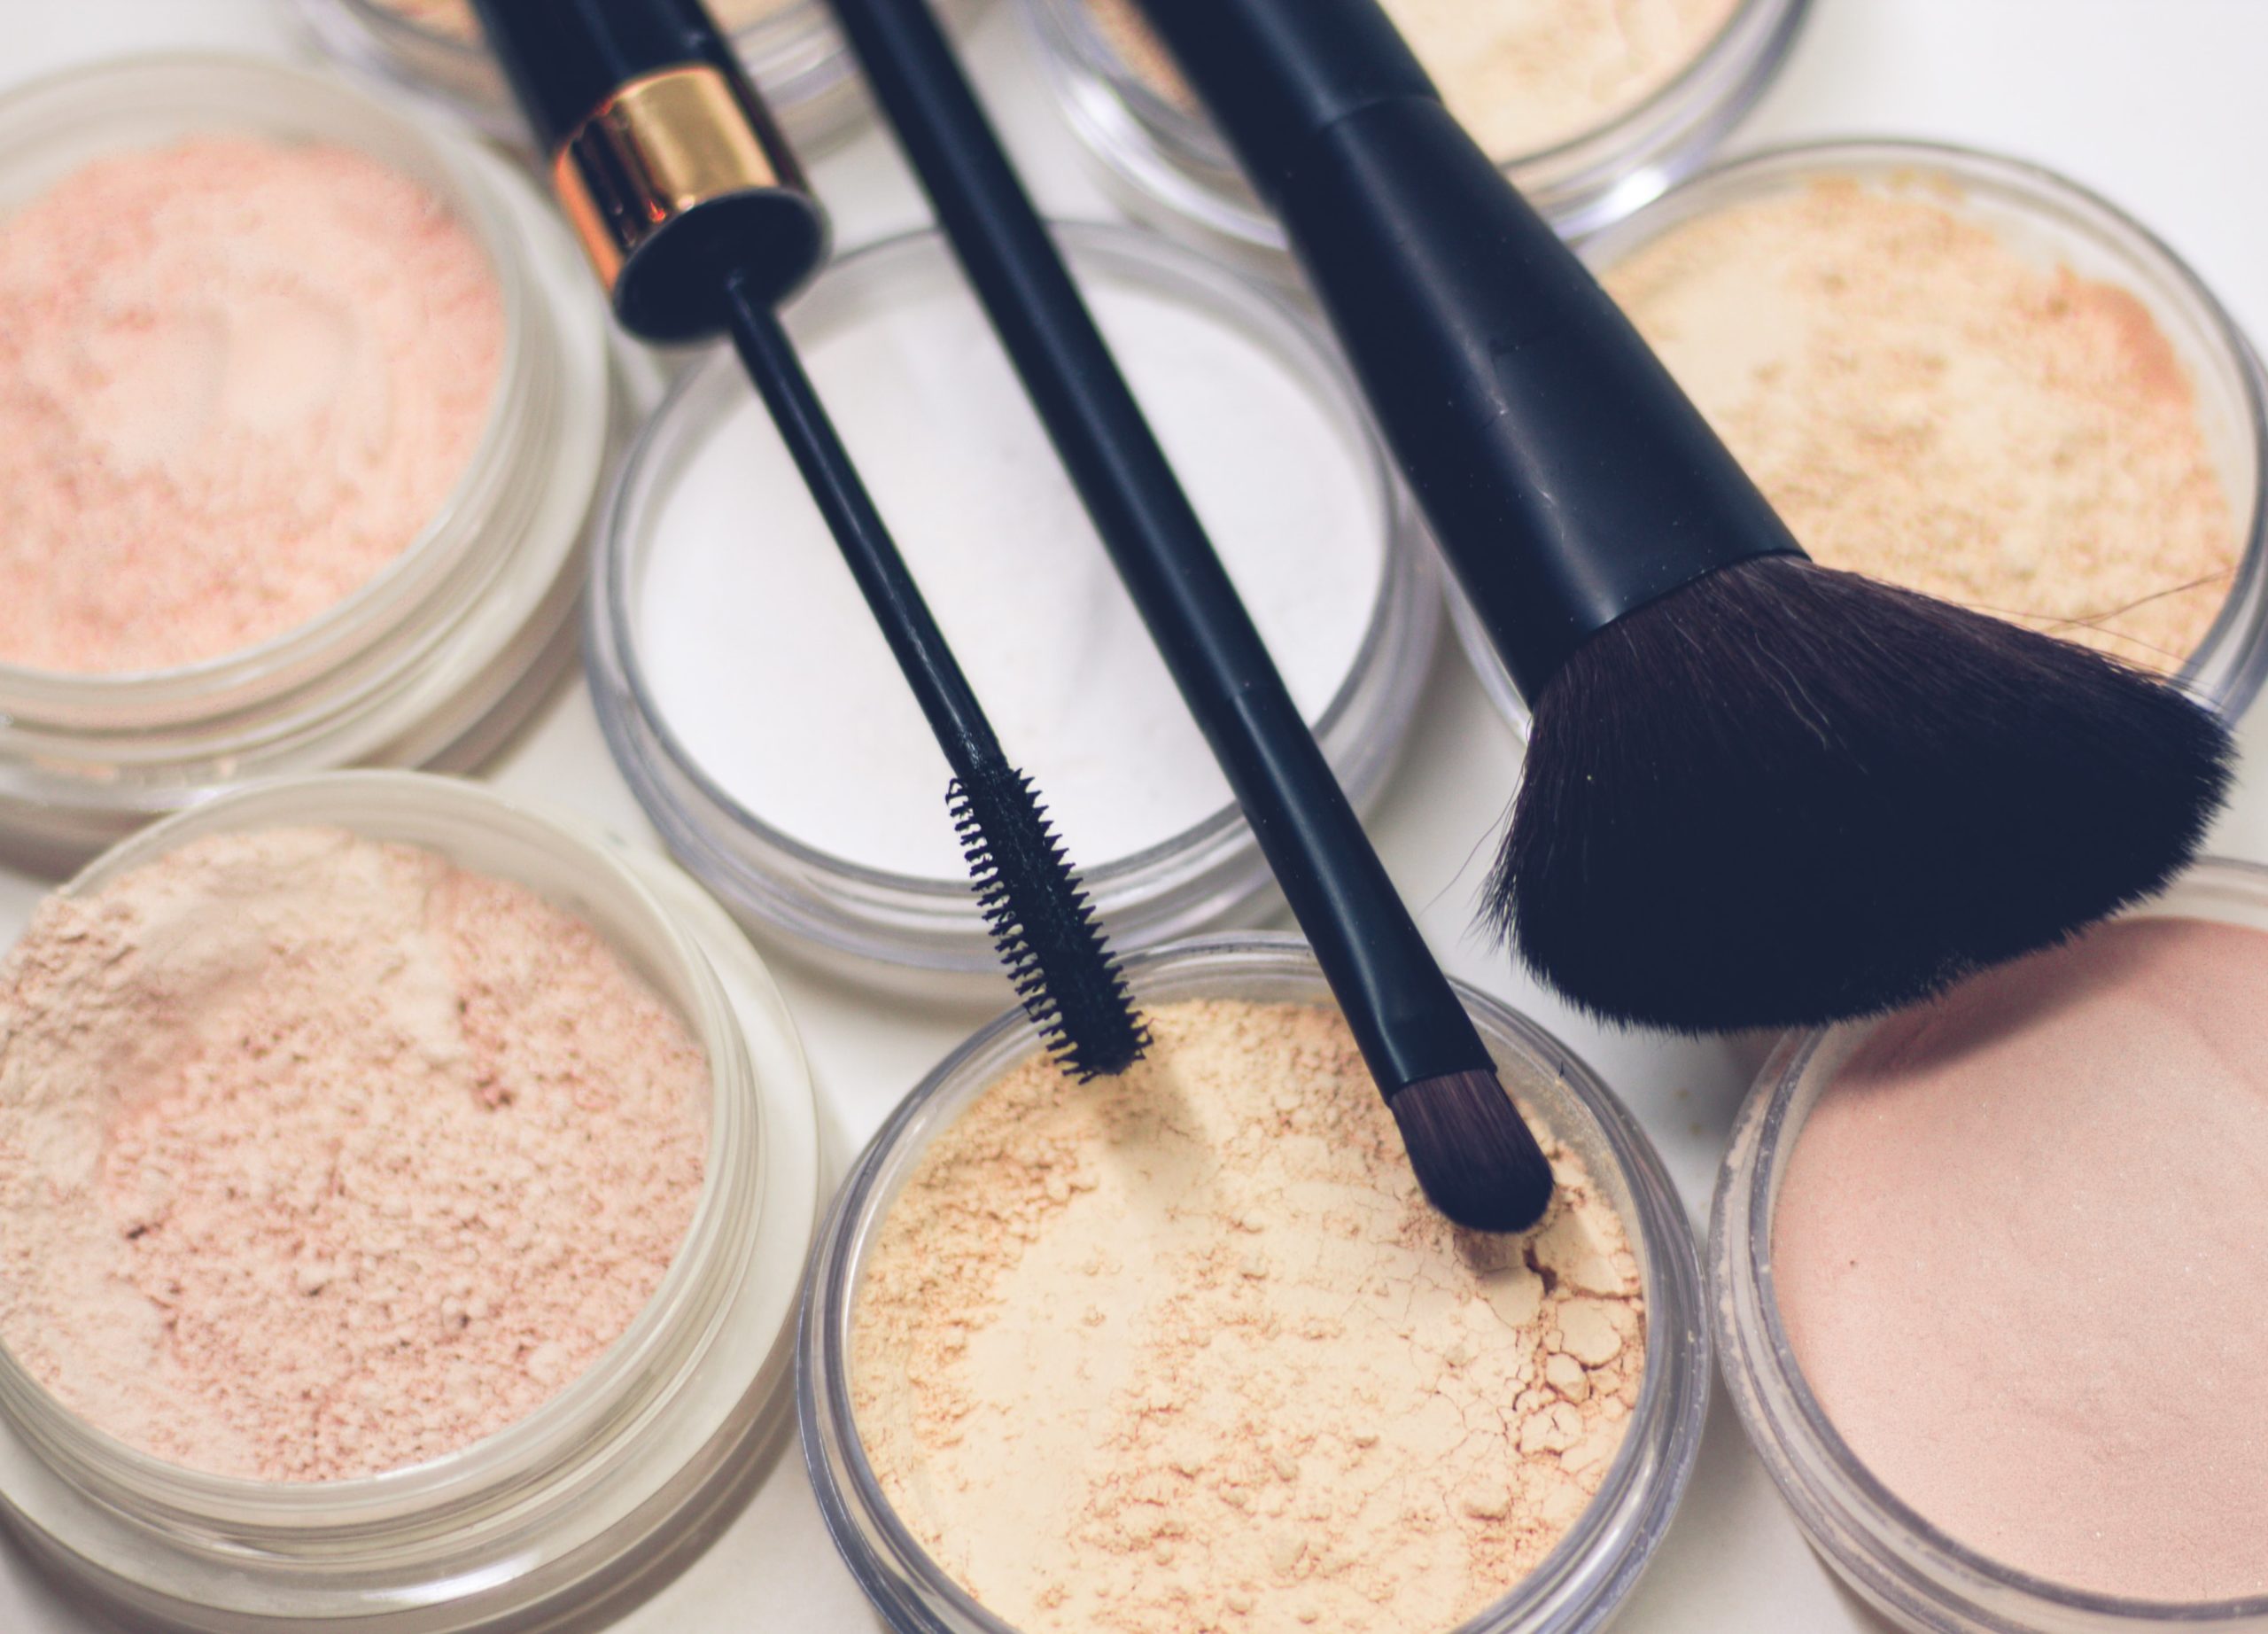 7 Best Setting Powders for Dry Skin in 2022